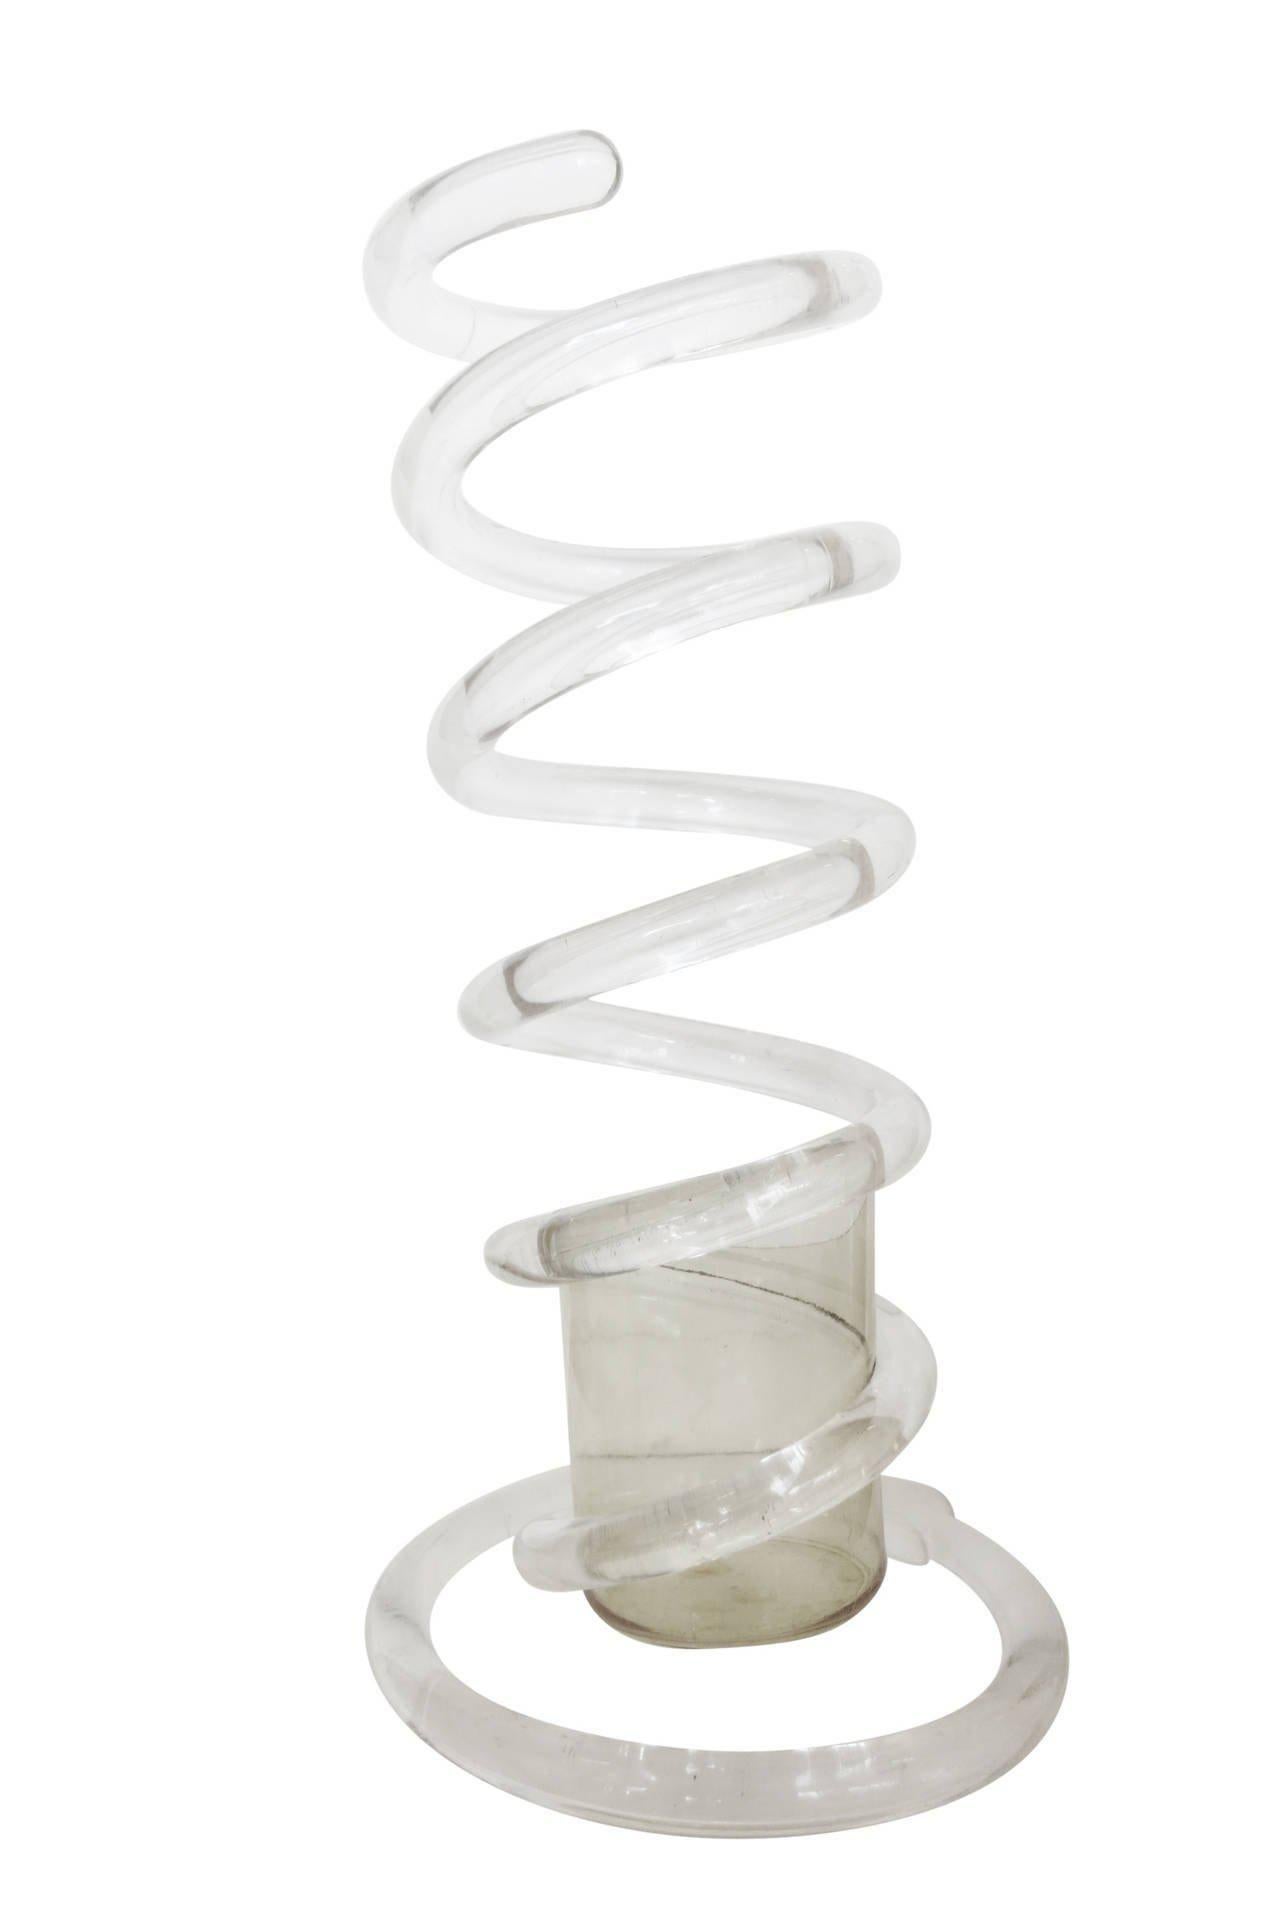 Dorothy Thorpe Spiral Spring Umbrella lucite stand. This piece of early lucite sculptural art features a piece of lucite spun into a spring shape with a small holder along the bottom.

All the qualities that made lucite a beguiling Material in the